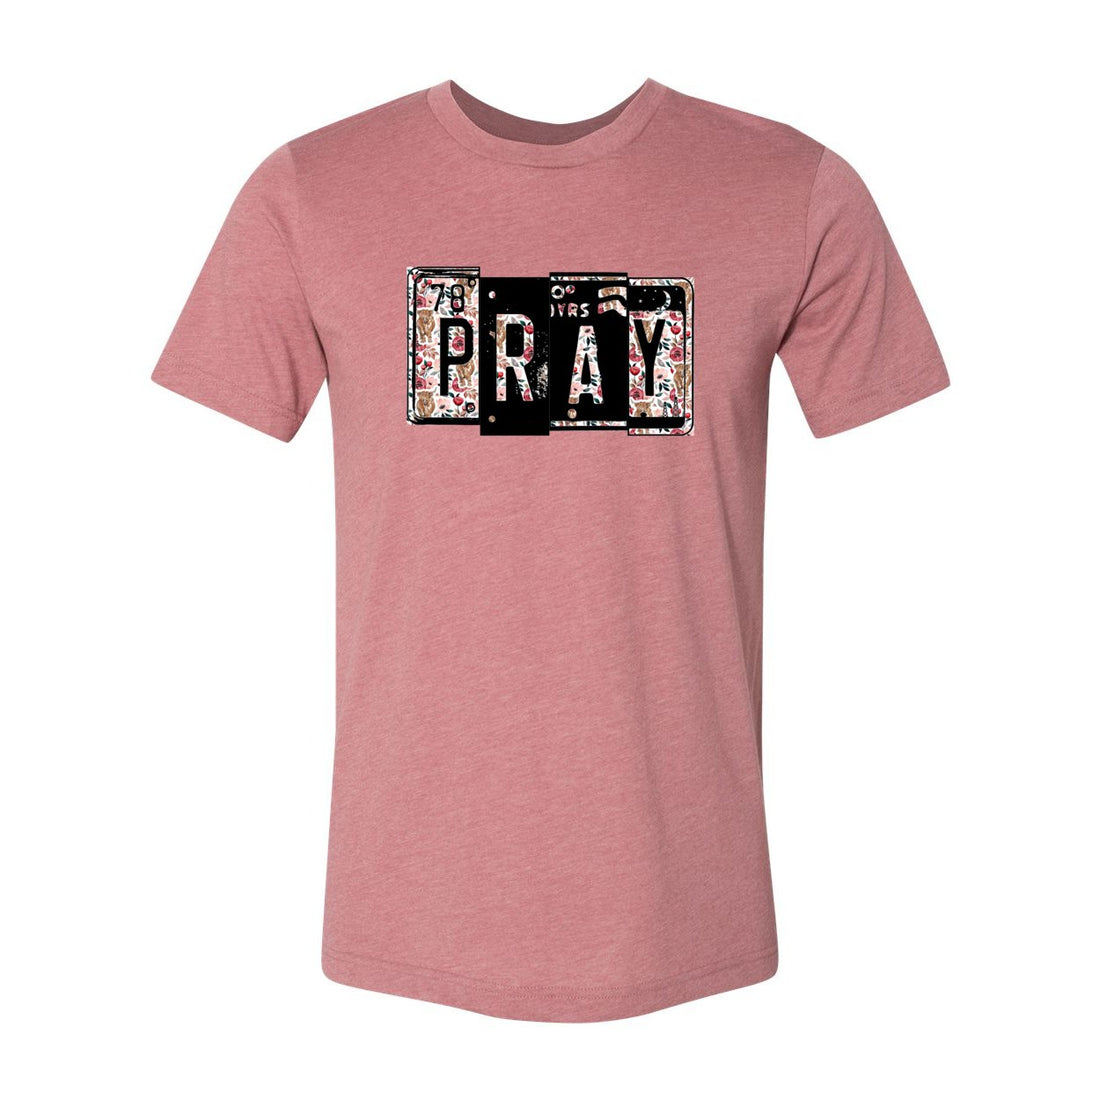 Pray Plates Tee Jersey Tee - T-Shirts - Positively Sassy - Pray Plates Tee Jersey Tee